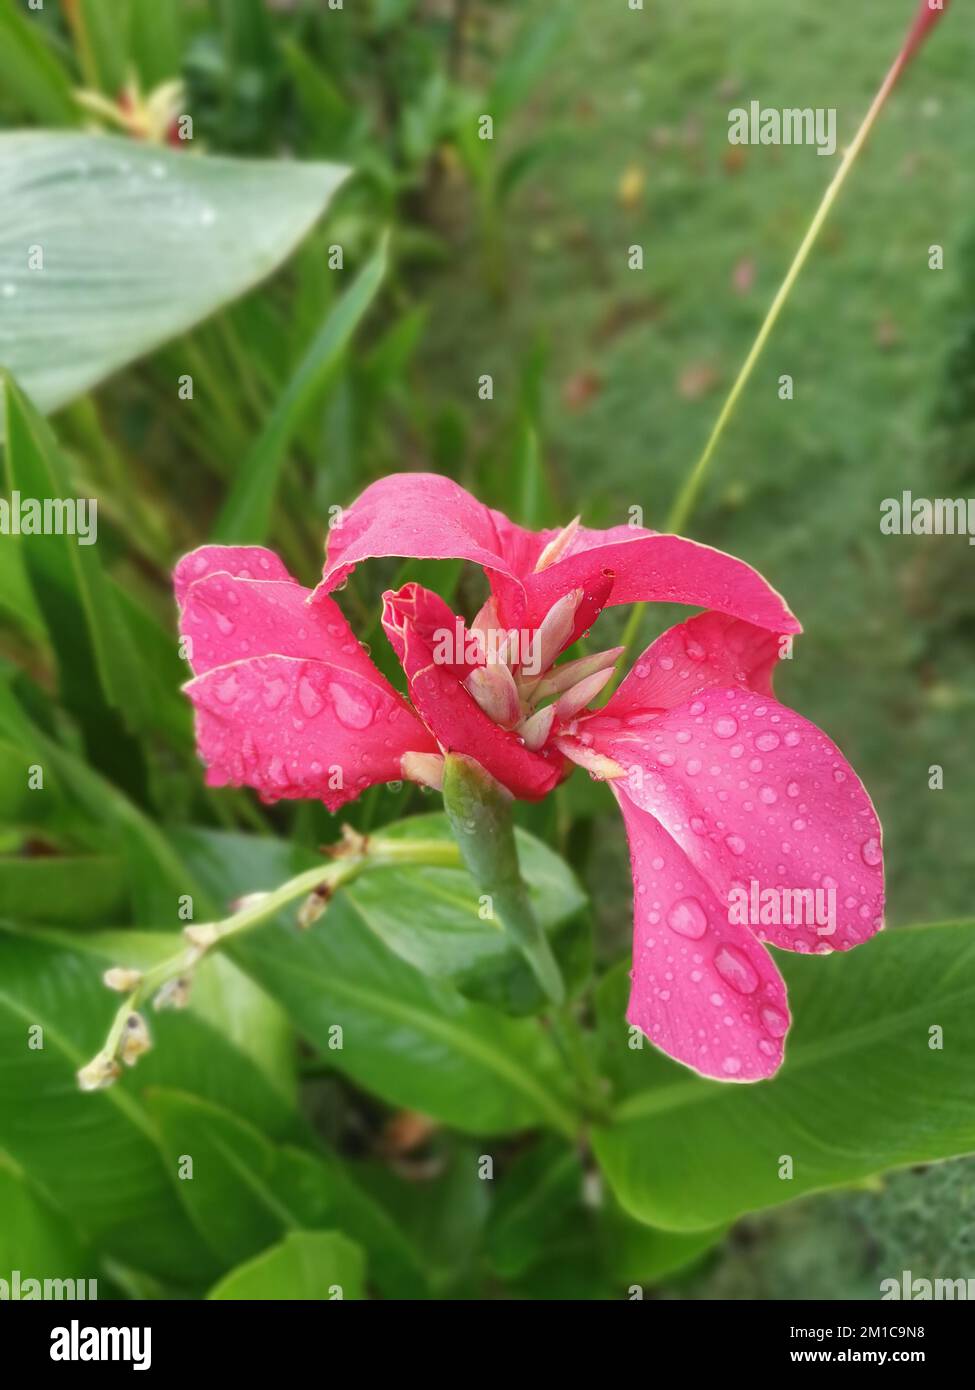 beautiful red-colored canna indica lily flower plant Stock Photo